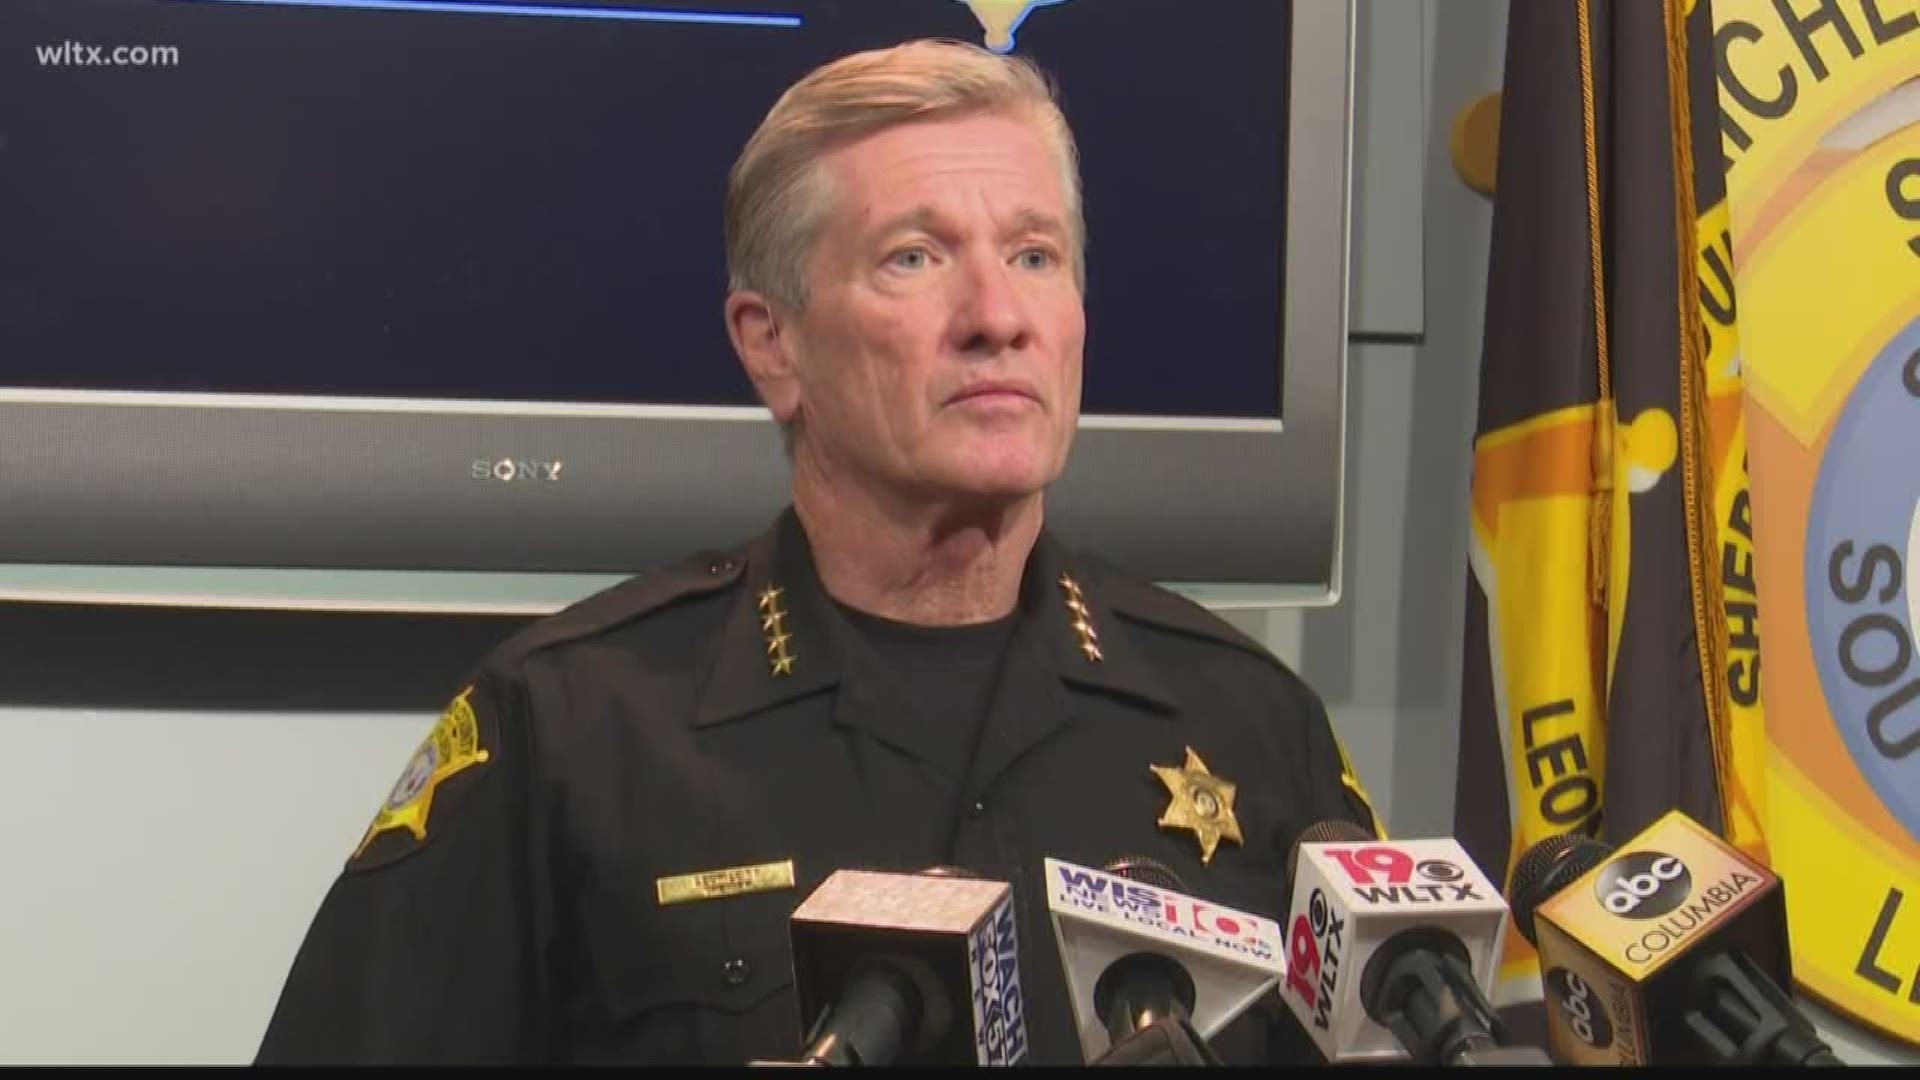 Sheriff Lott says the probe into racist videos and a threat to  'shoot up' Cardinal Newman has now ended. More: https://on.wltx.com/33H2Yzr